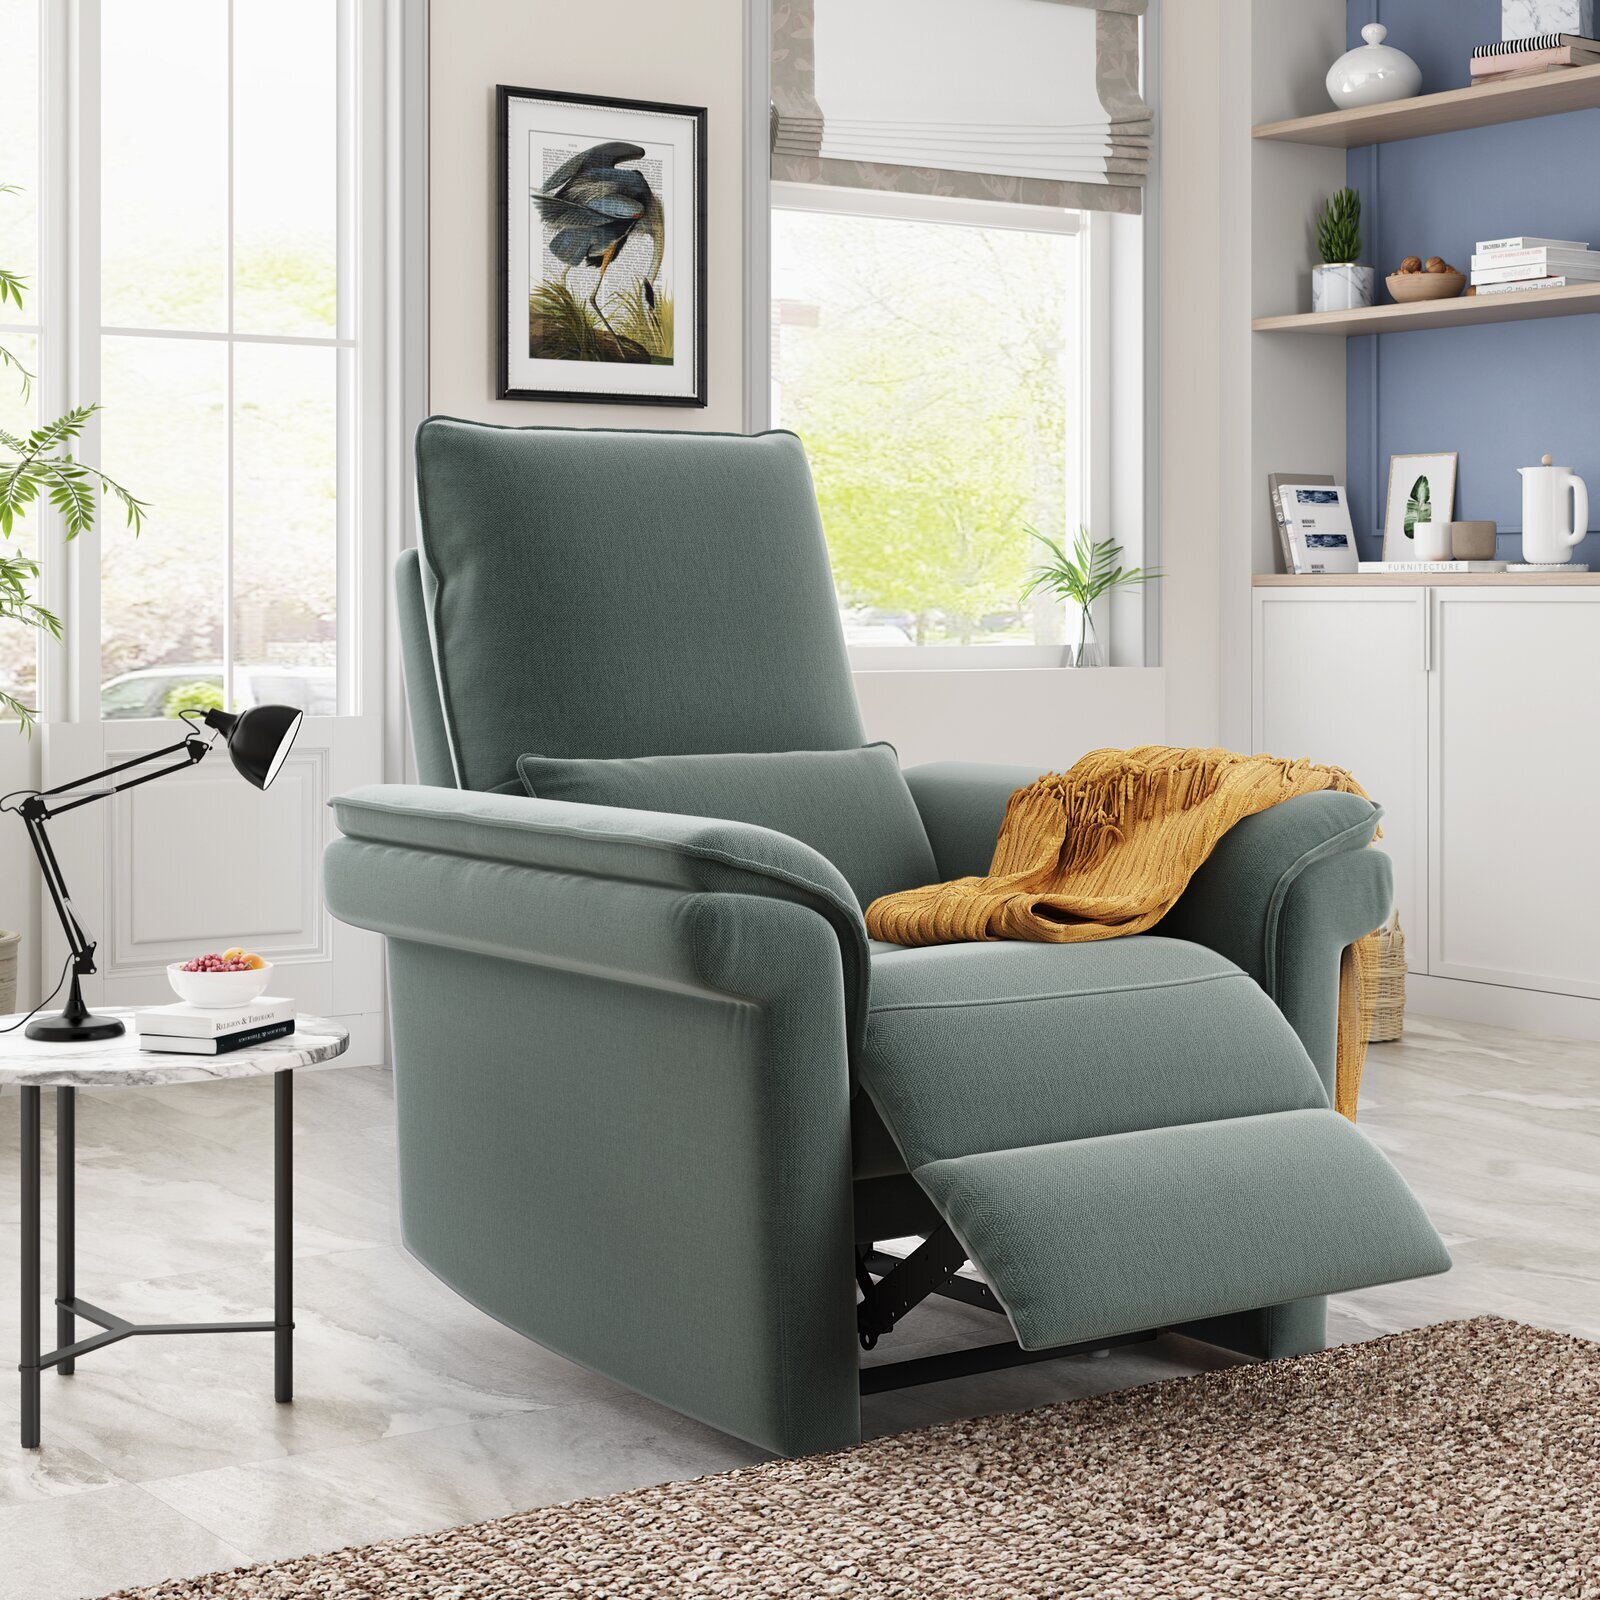 Comfortable Recliner with Padded Seats